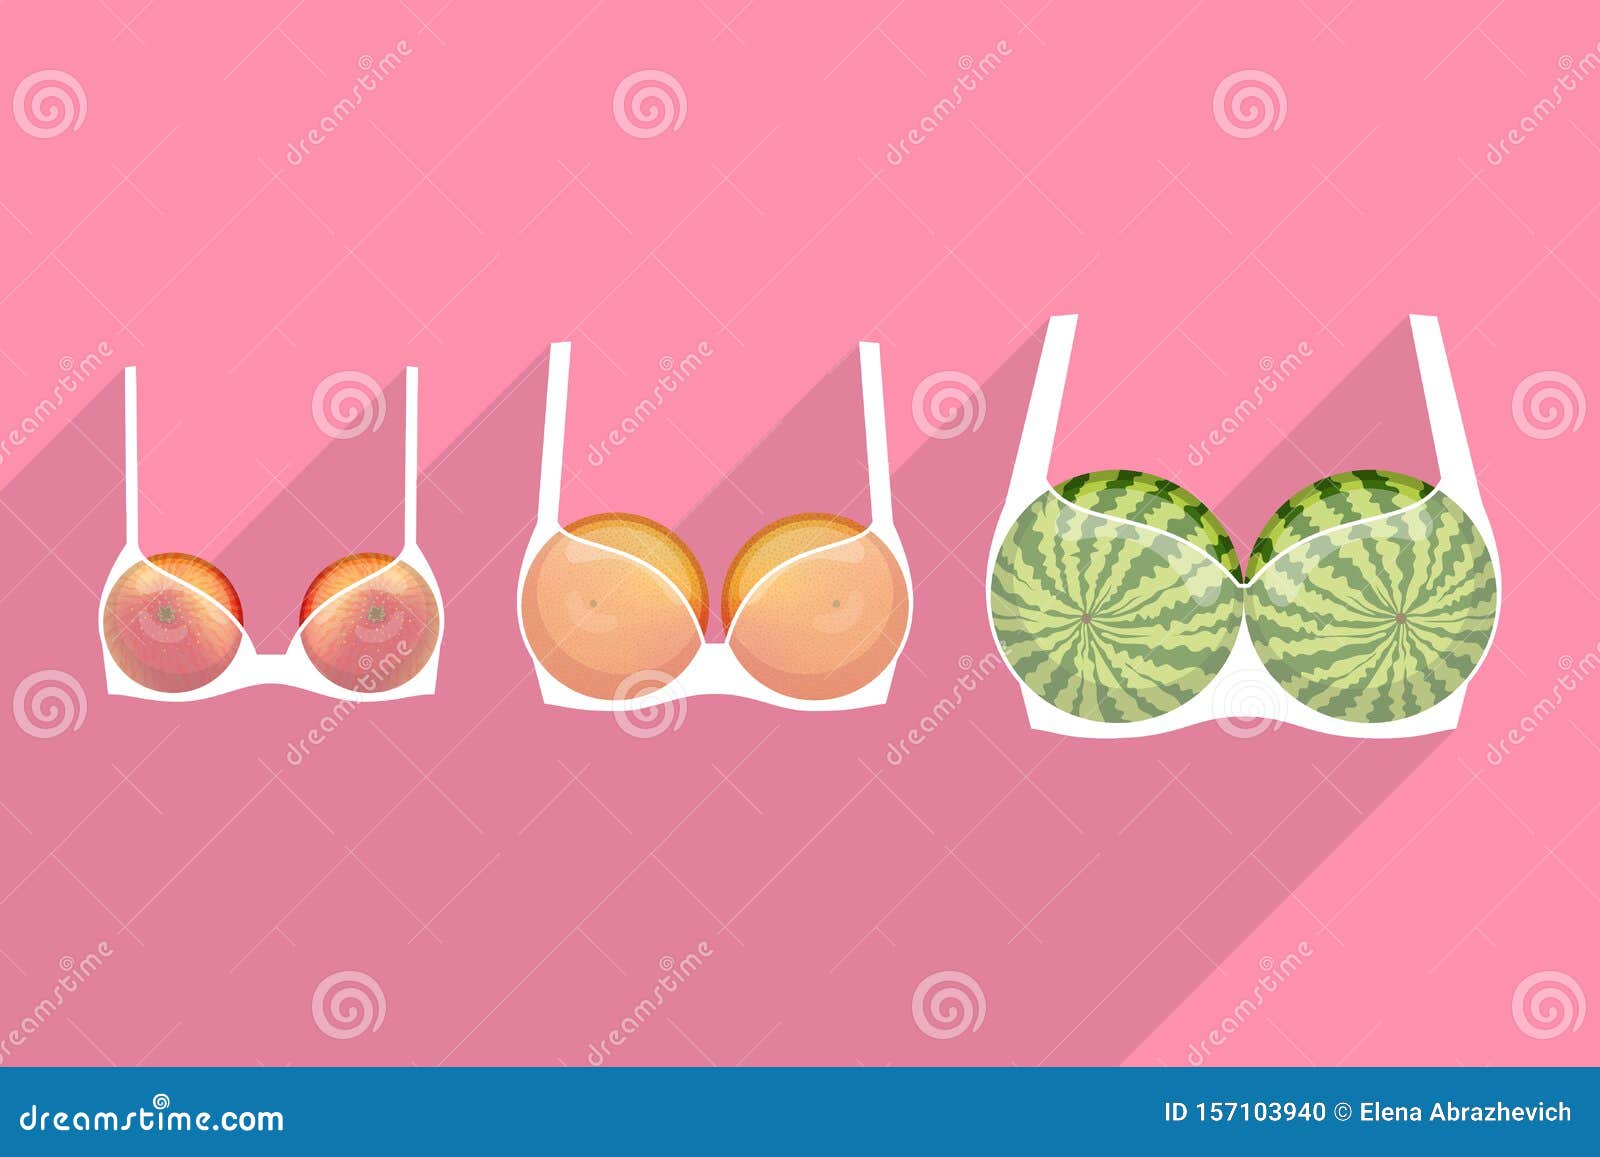 Brassieres with Fruits Inside. Different Bra Sizes Stock Vector